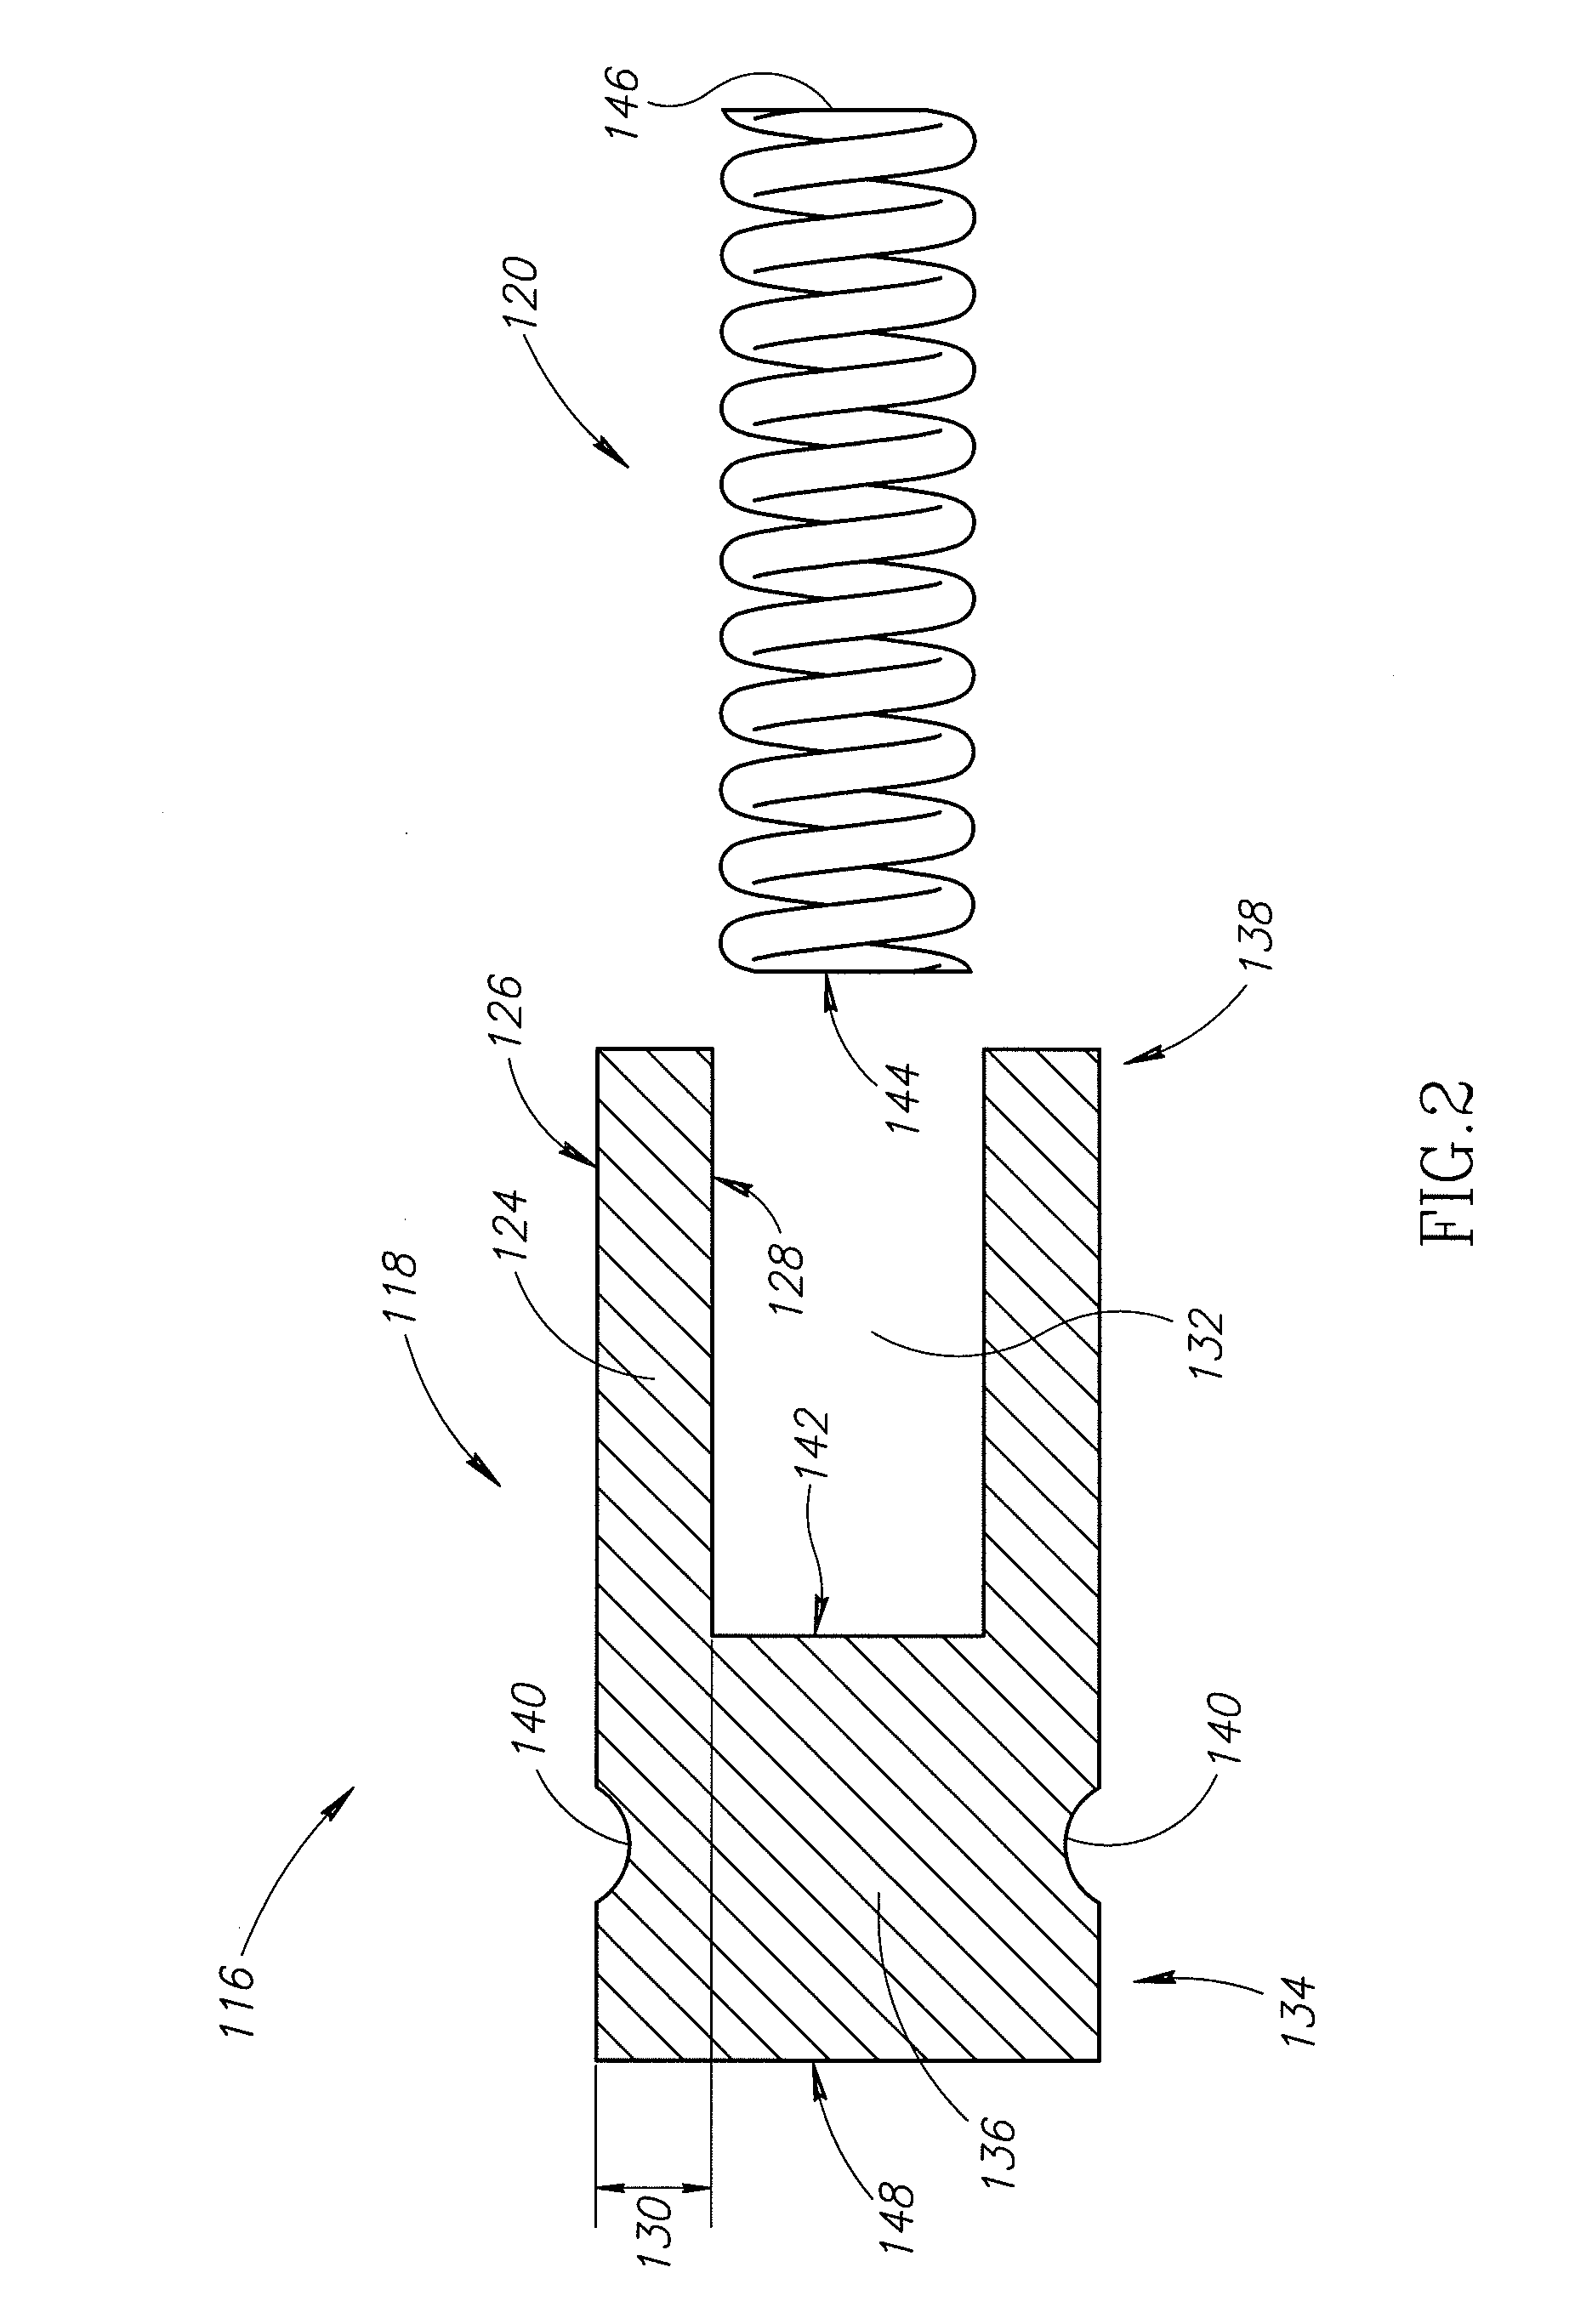 Locking differential with shear pin/spring assembly